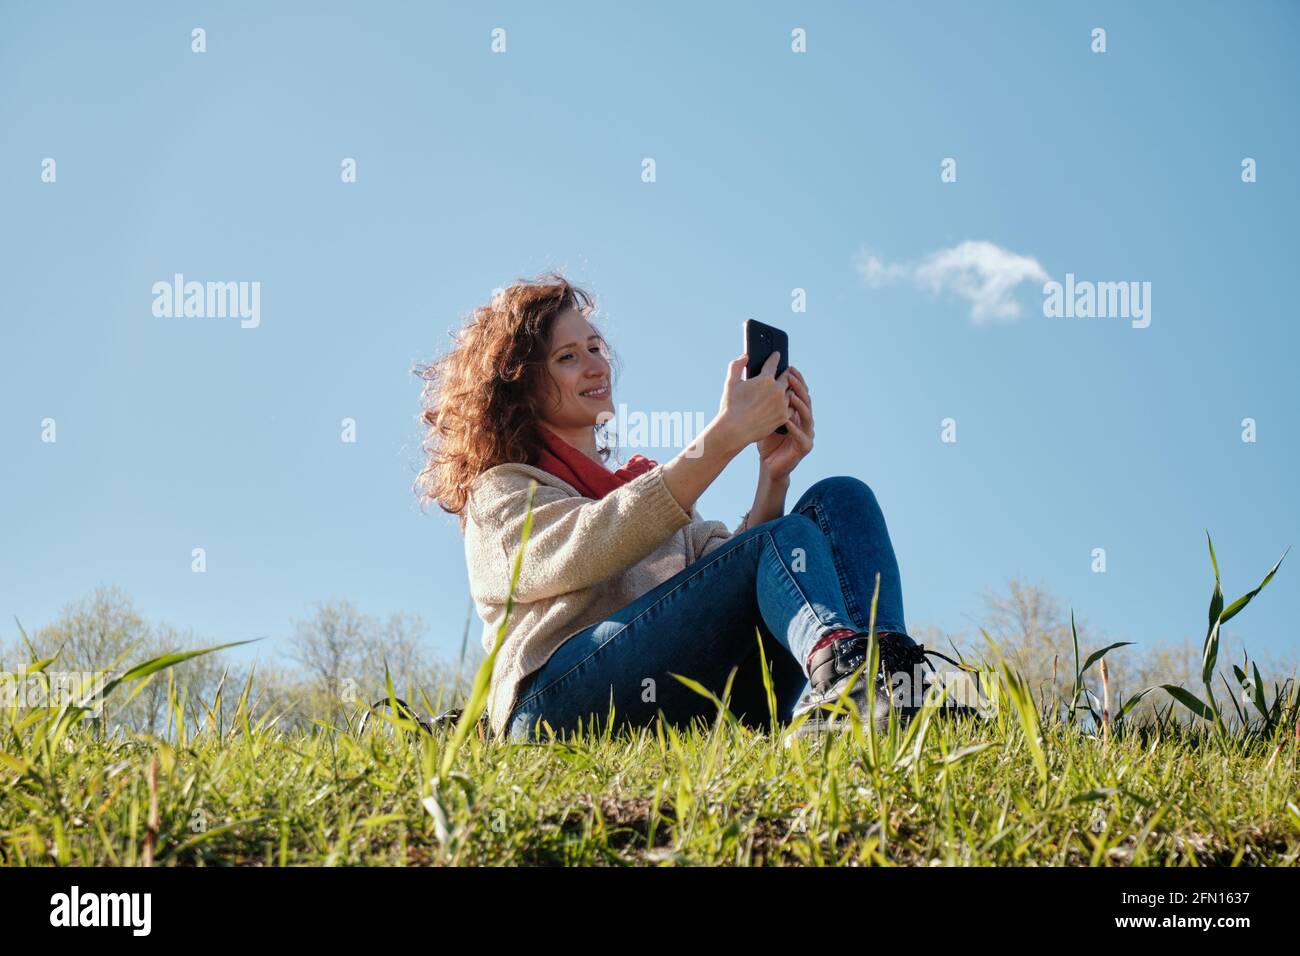 Young girl with a phone in her hands, green grass and blue sky Stock Photo